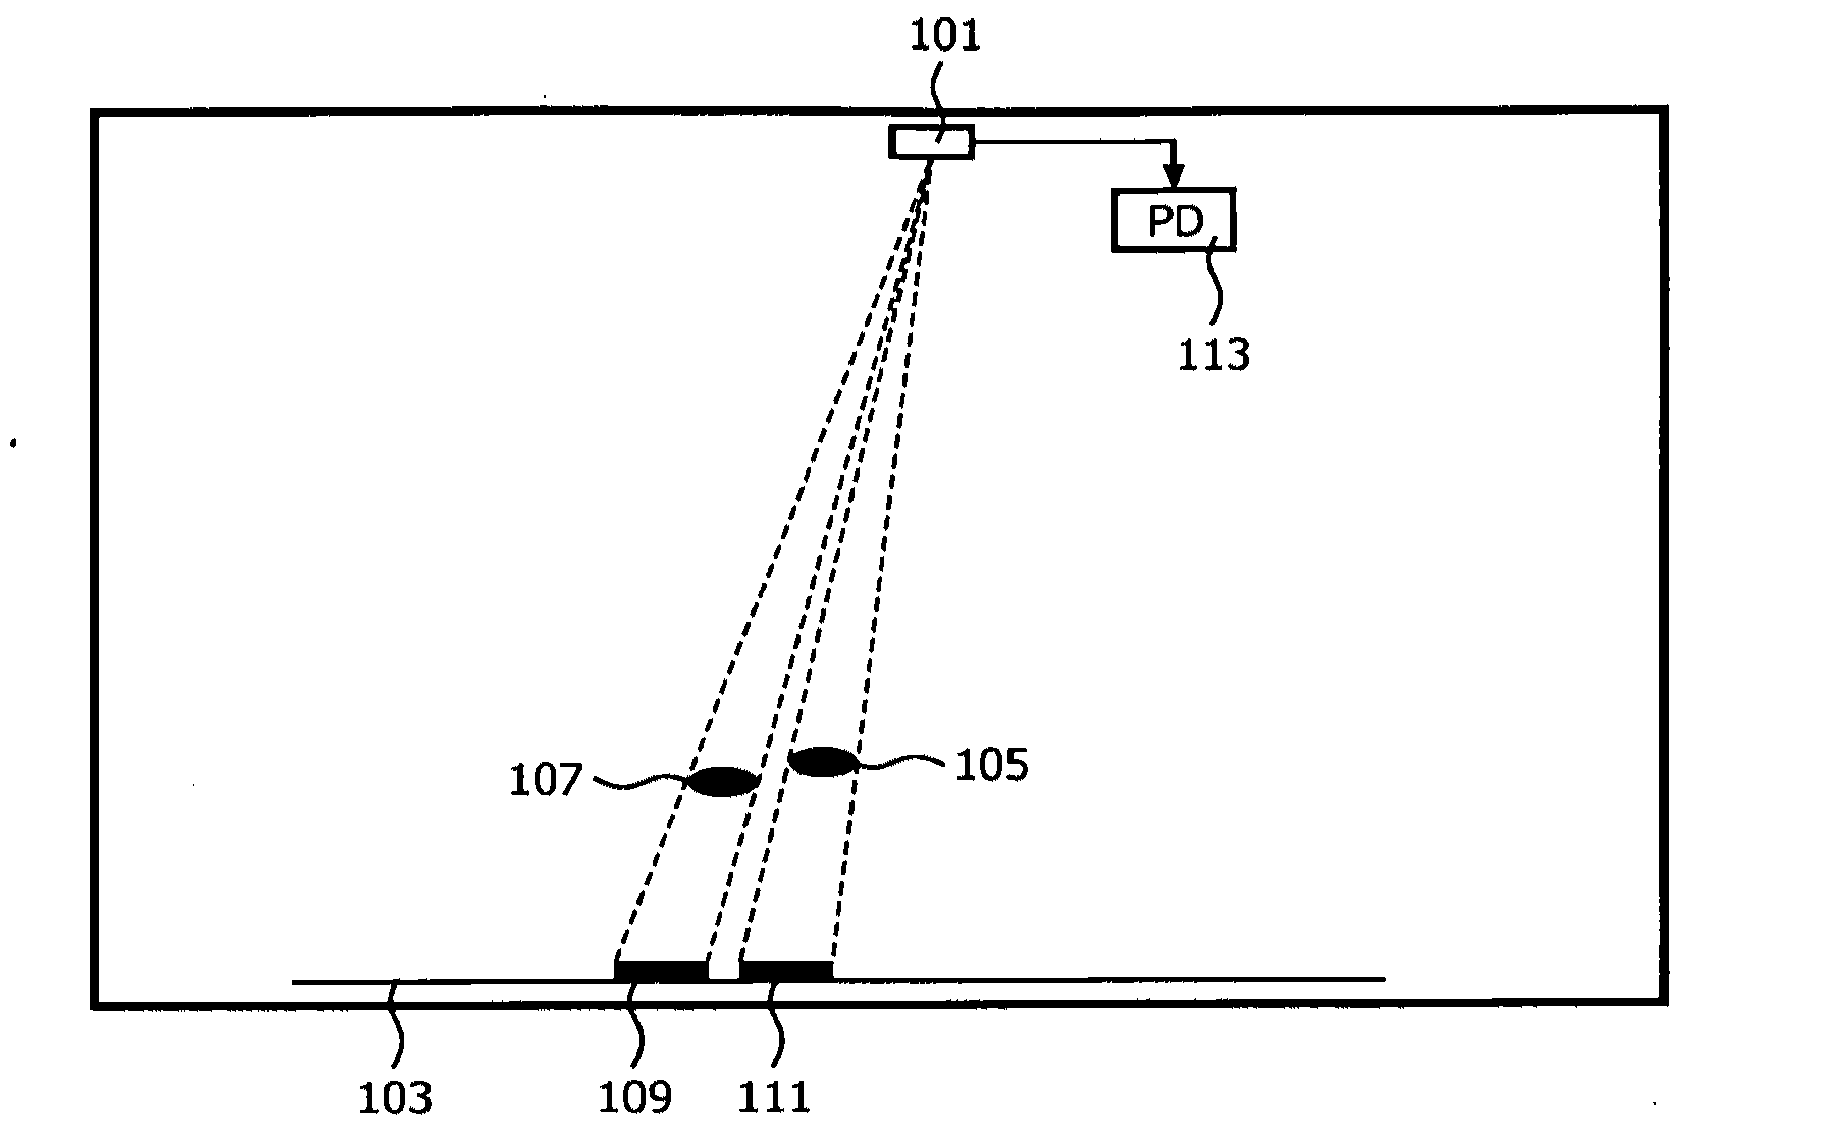 Determination of a position characteristic for an object